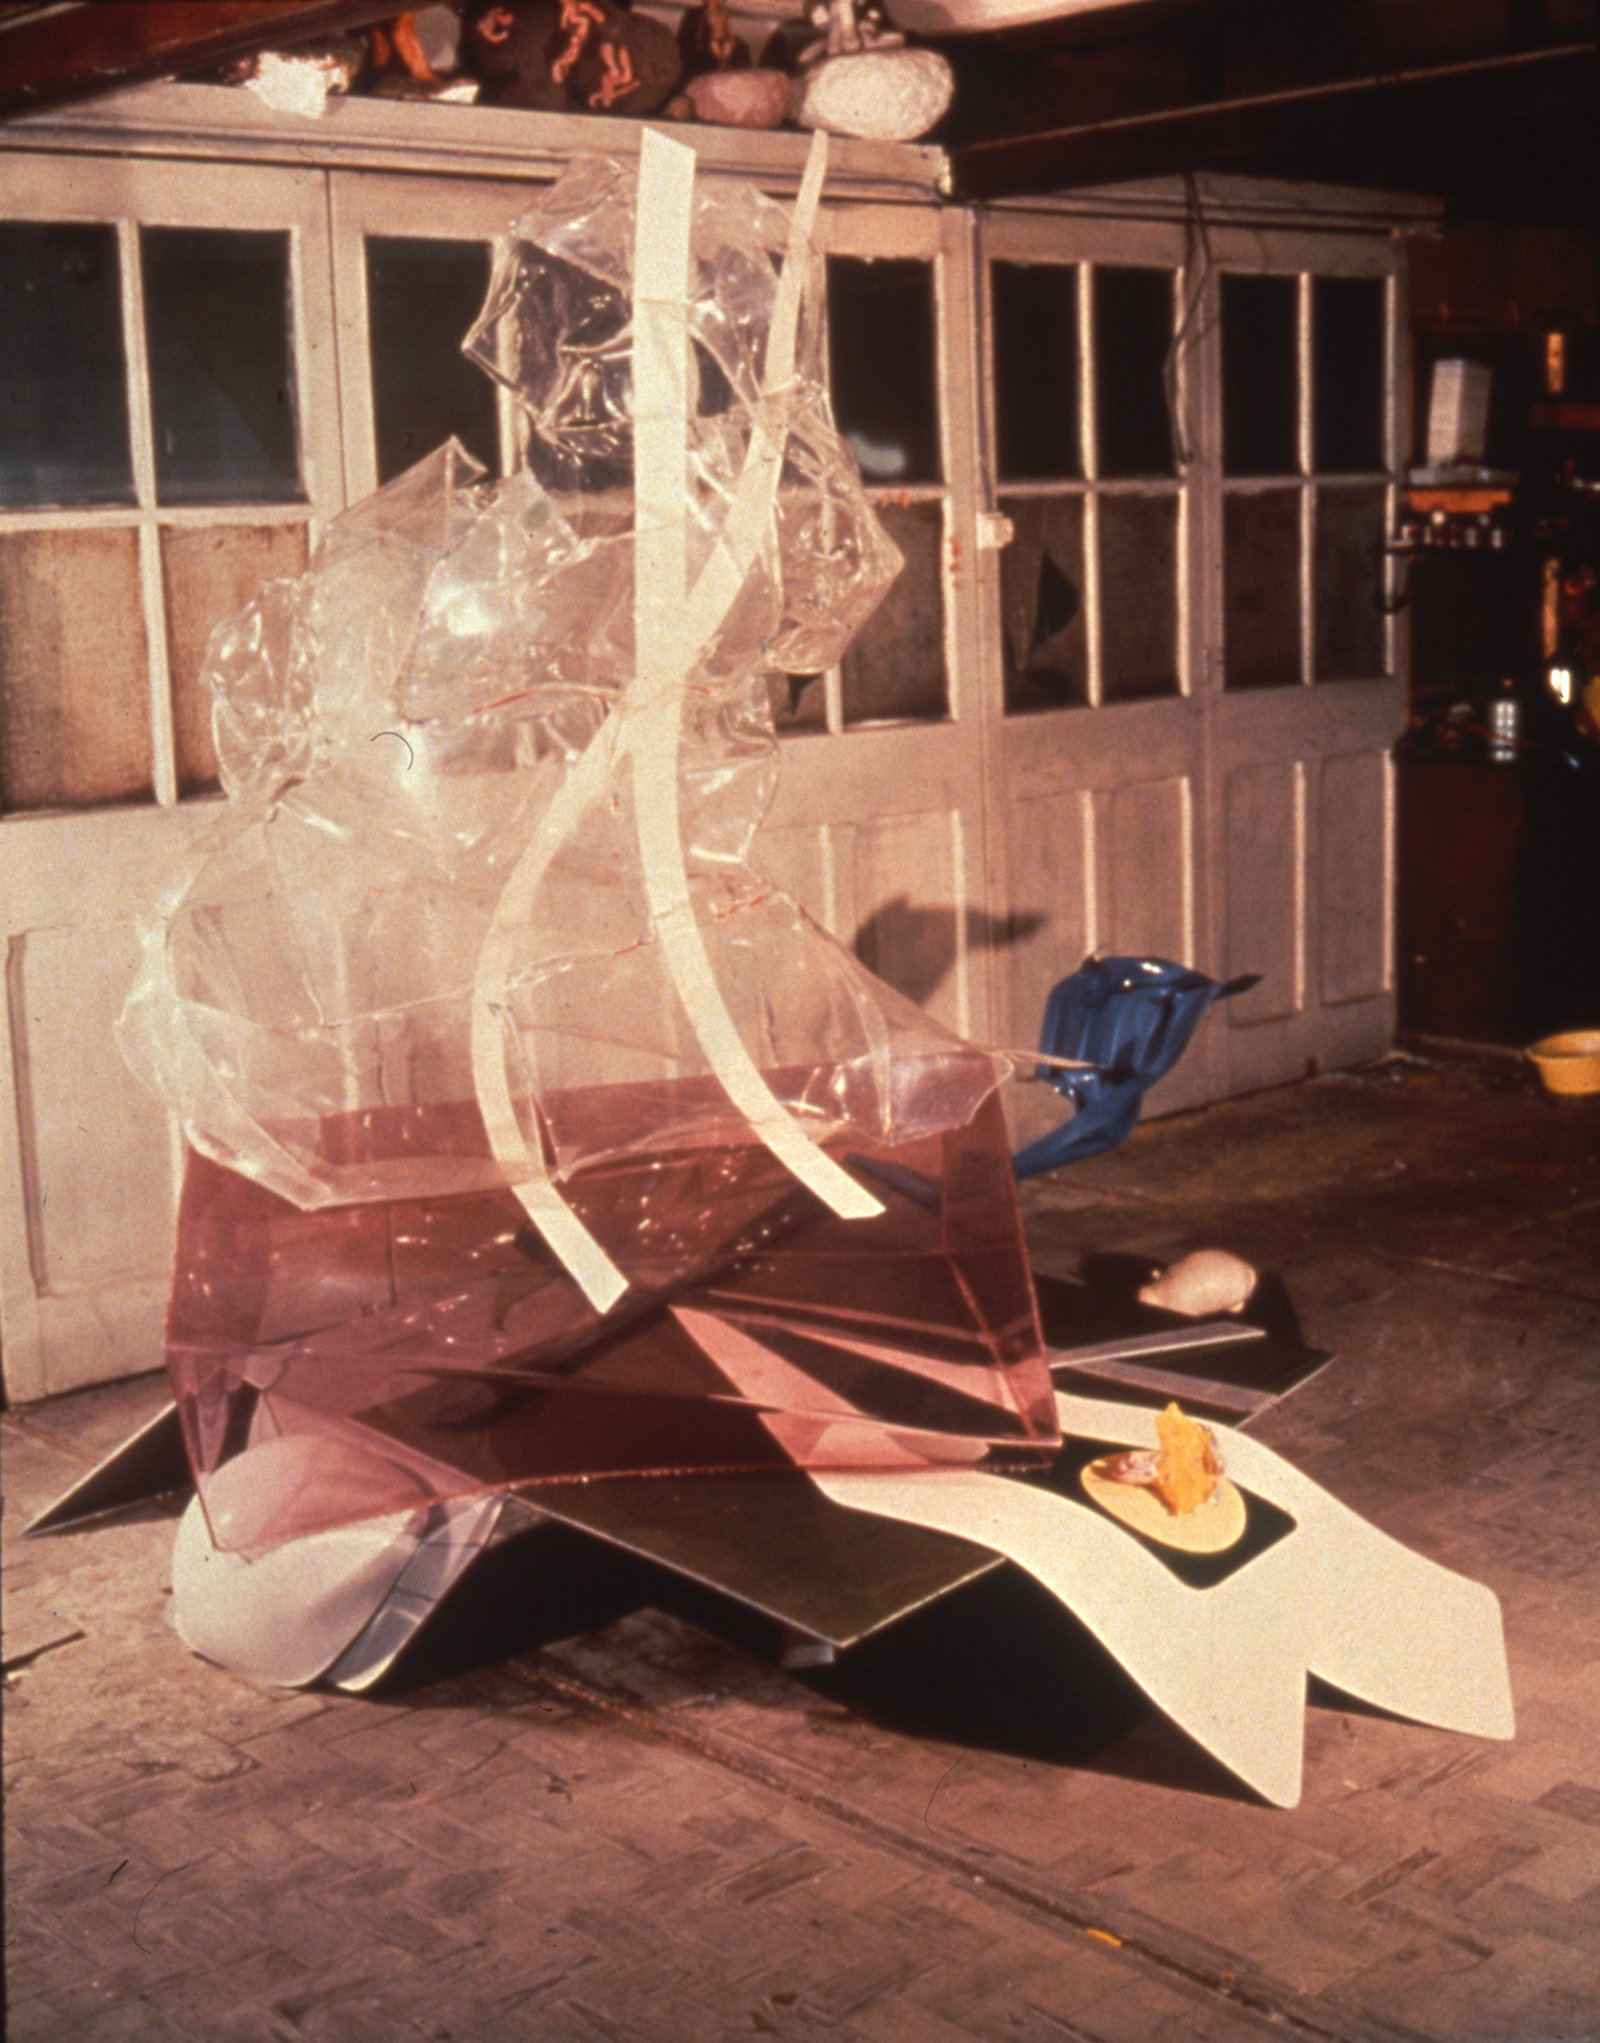 Jerry Pethick, Intersection, 1967, thermo plastics, 86 x 72 x 65 in. (219 x 183 x 165 cm)